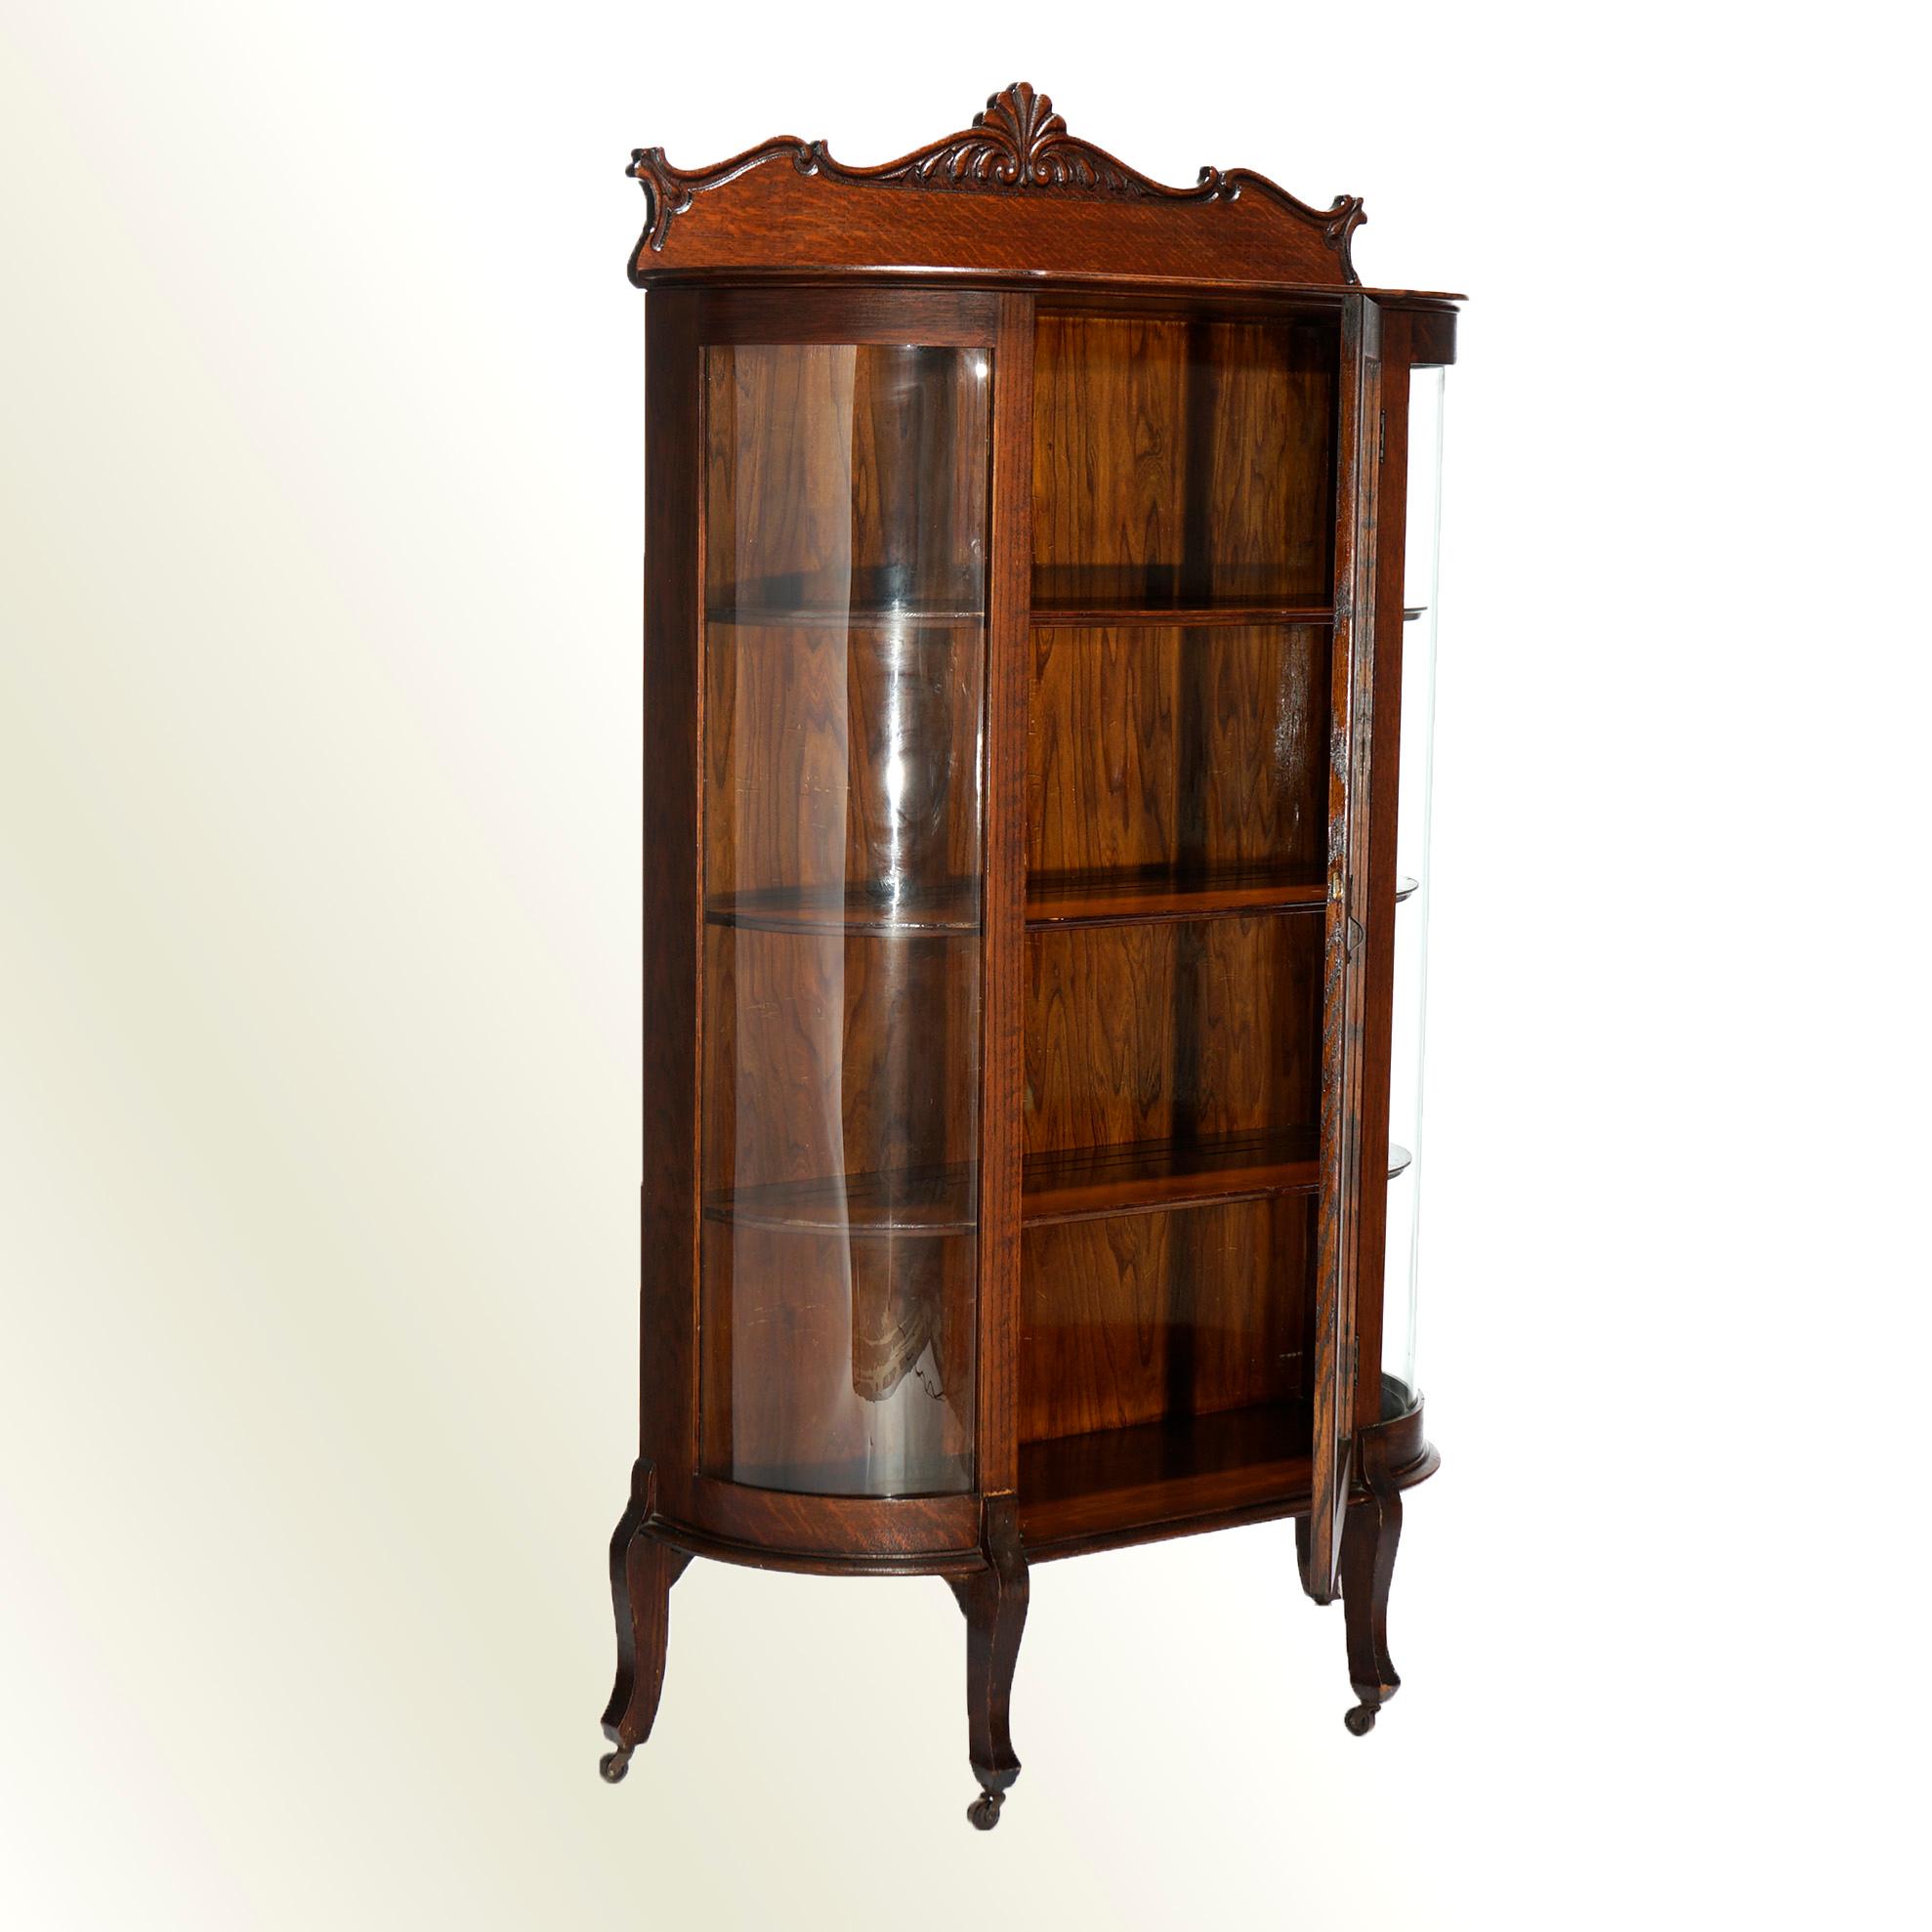 An antique china cabinet offers quarter sawn oak construction with foliate carved backsplash over sing door case having curved glass and opening to shelved interior, raised on cabriole legs, c1900.

Measures- 64.25''H x 37.25''W x